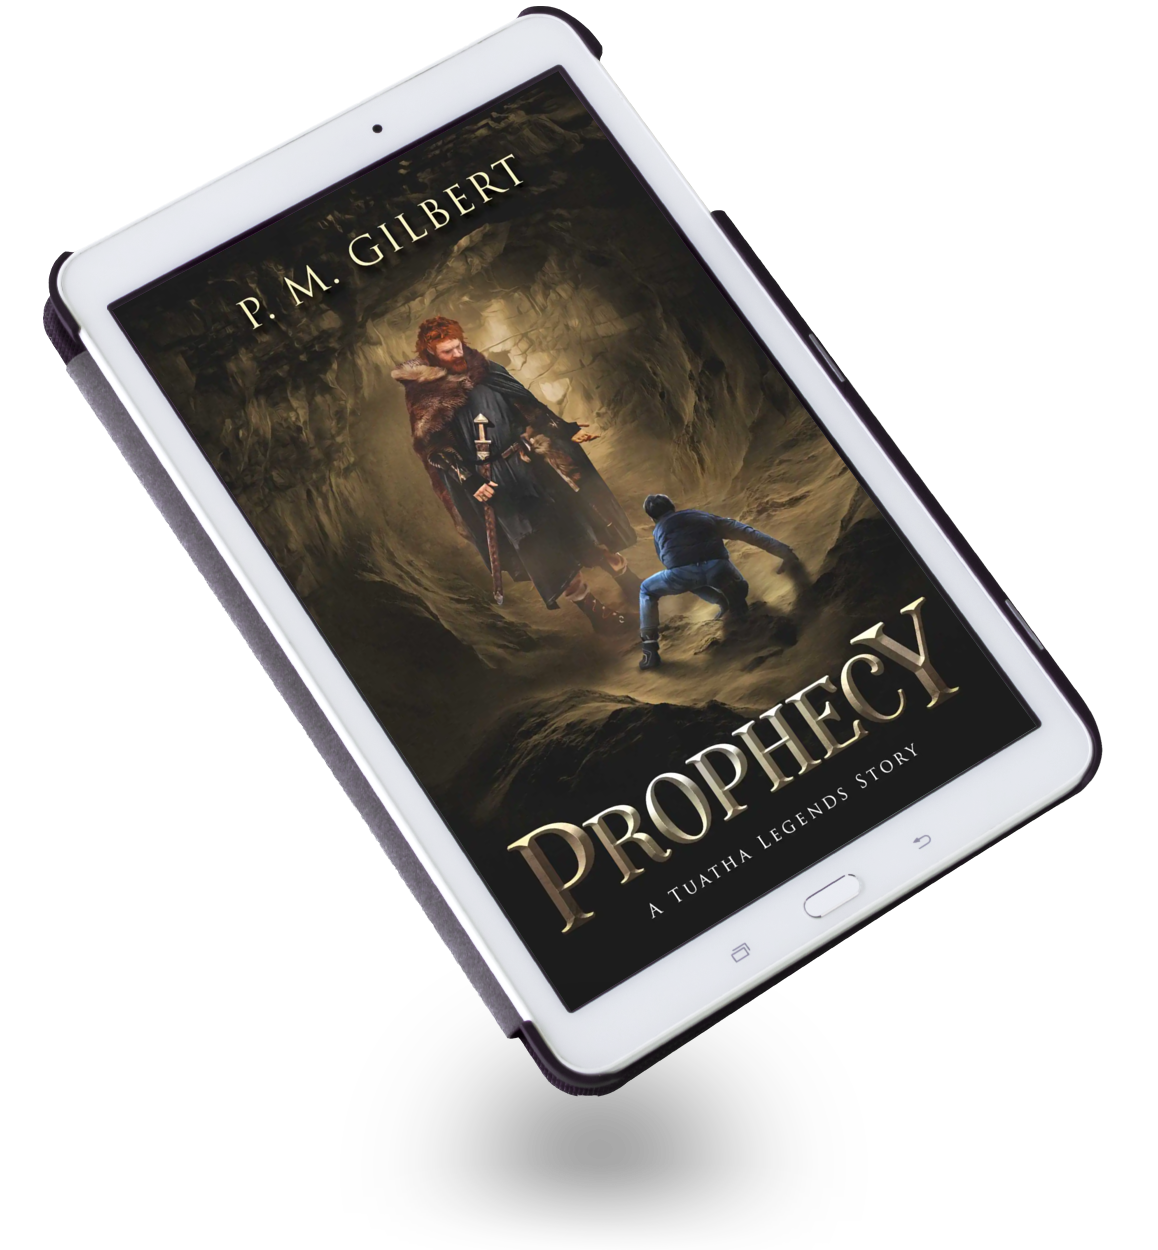 Prophecy (Book 1) Tuatha Legends Series - Shown on White eReader